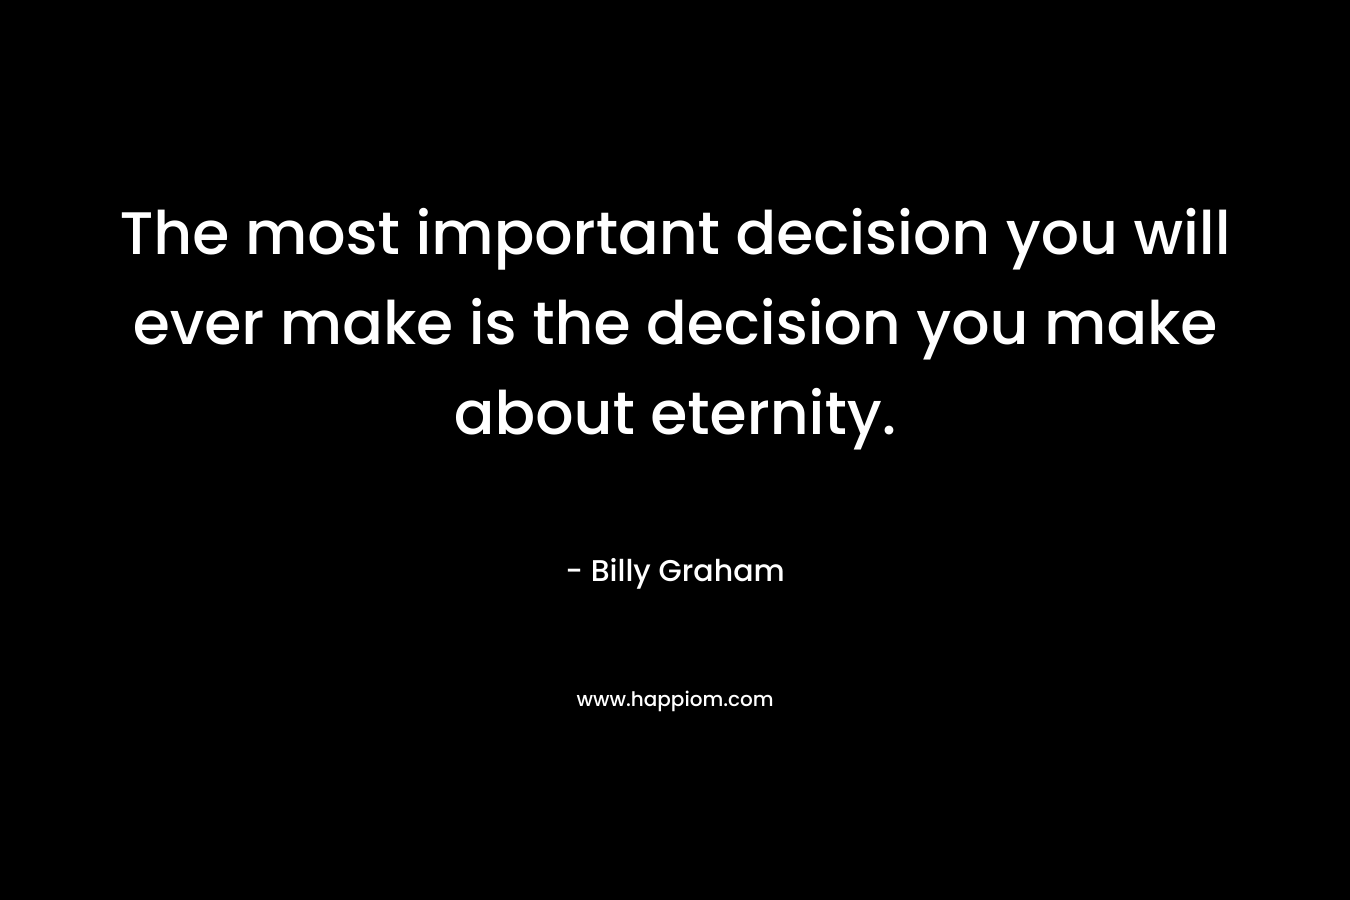 The most important decision you will ever make is the decision you make about eternity.